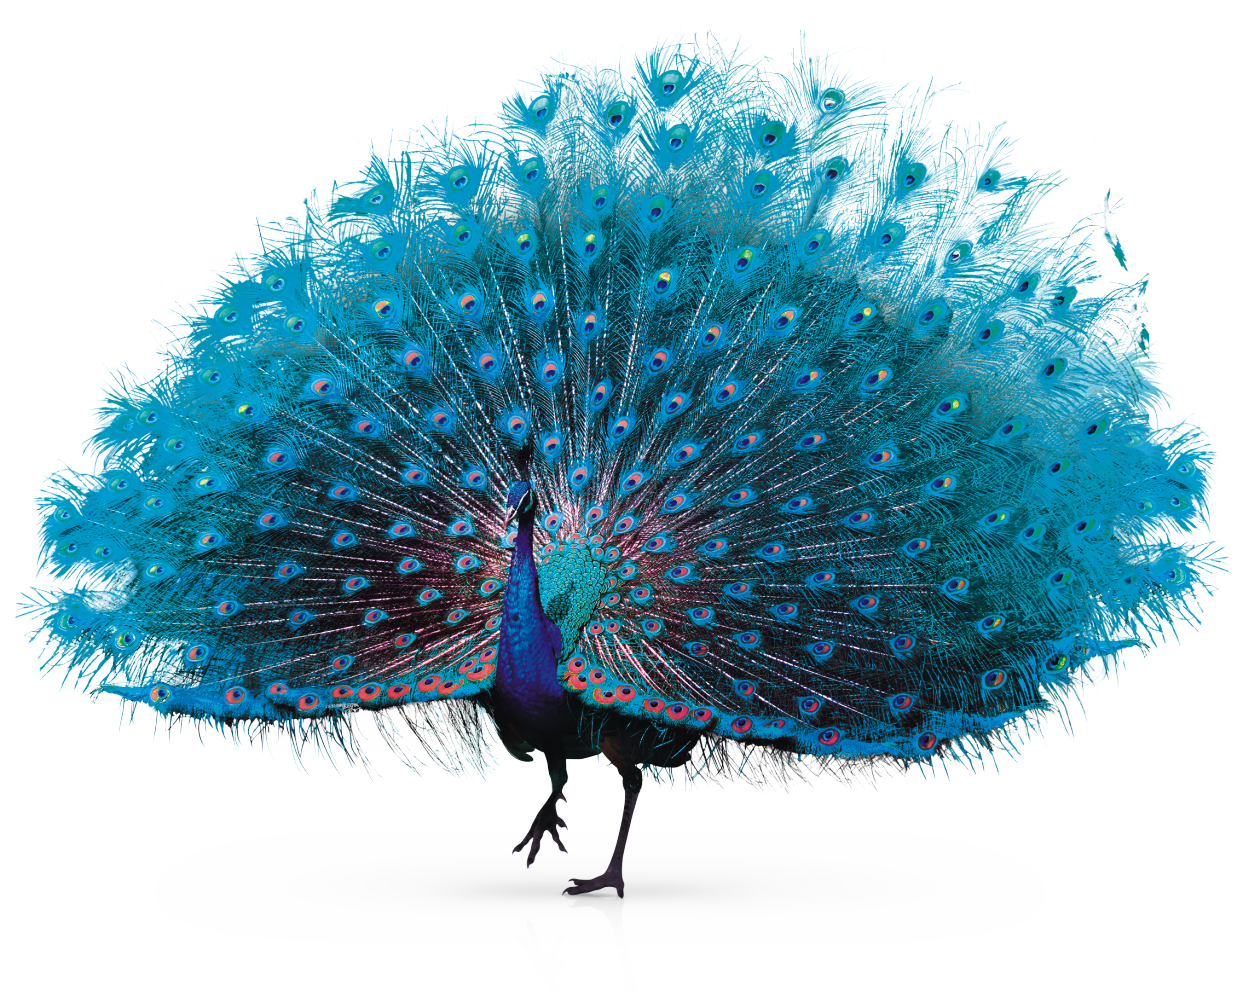 A Peacock With Its Tail Open